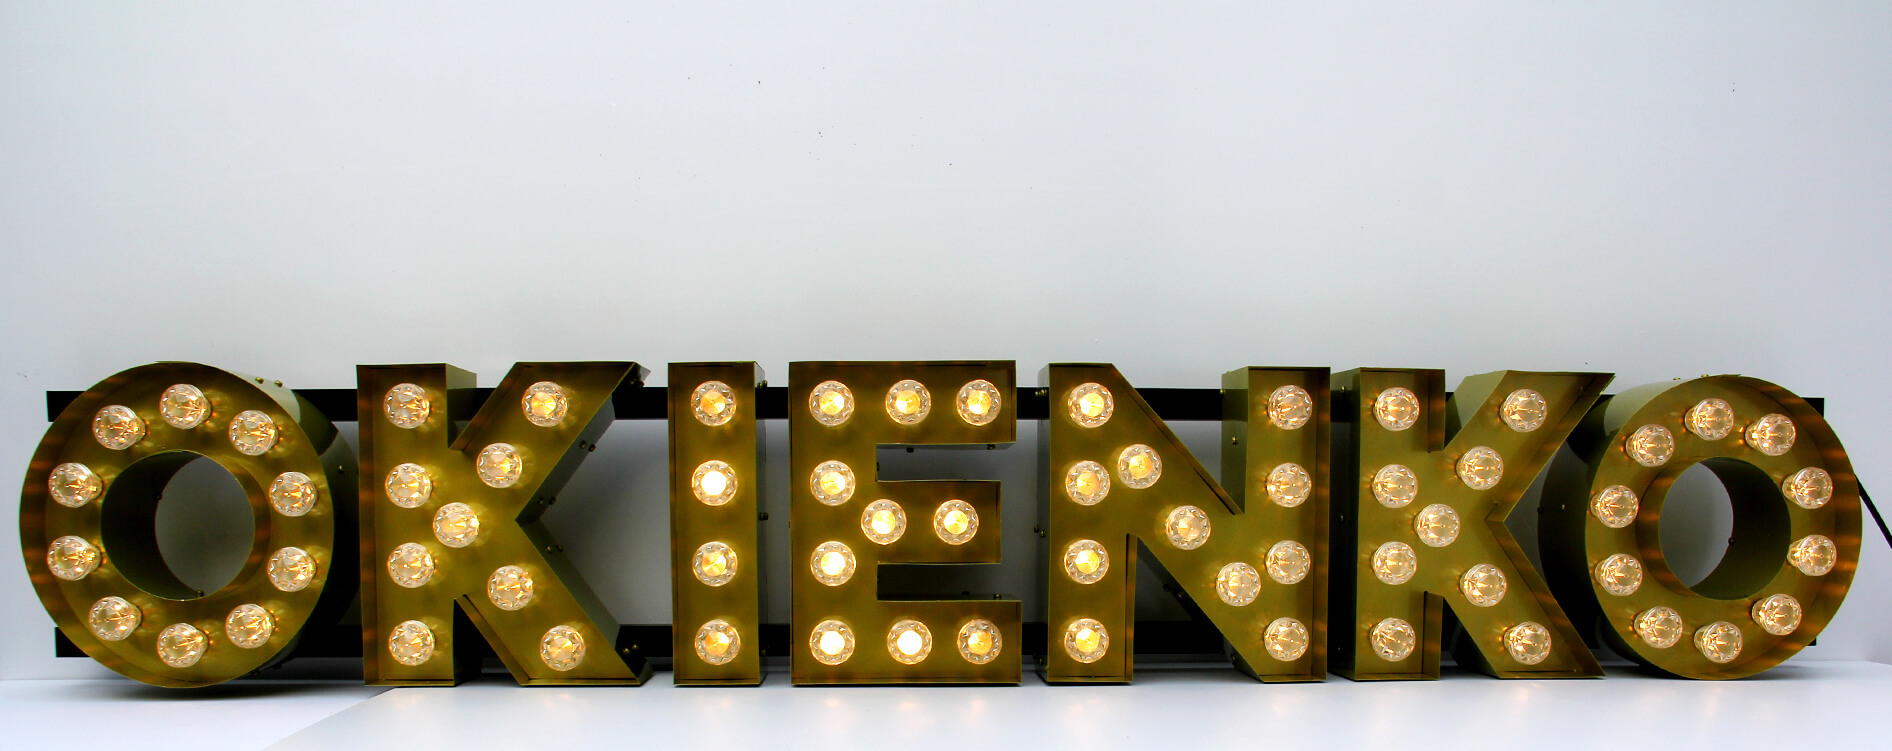 pane - Window - Letters with bulbs on the frame